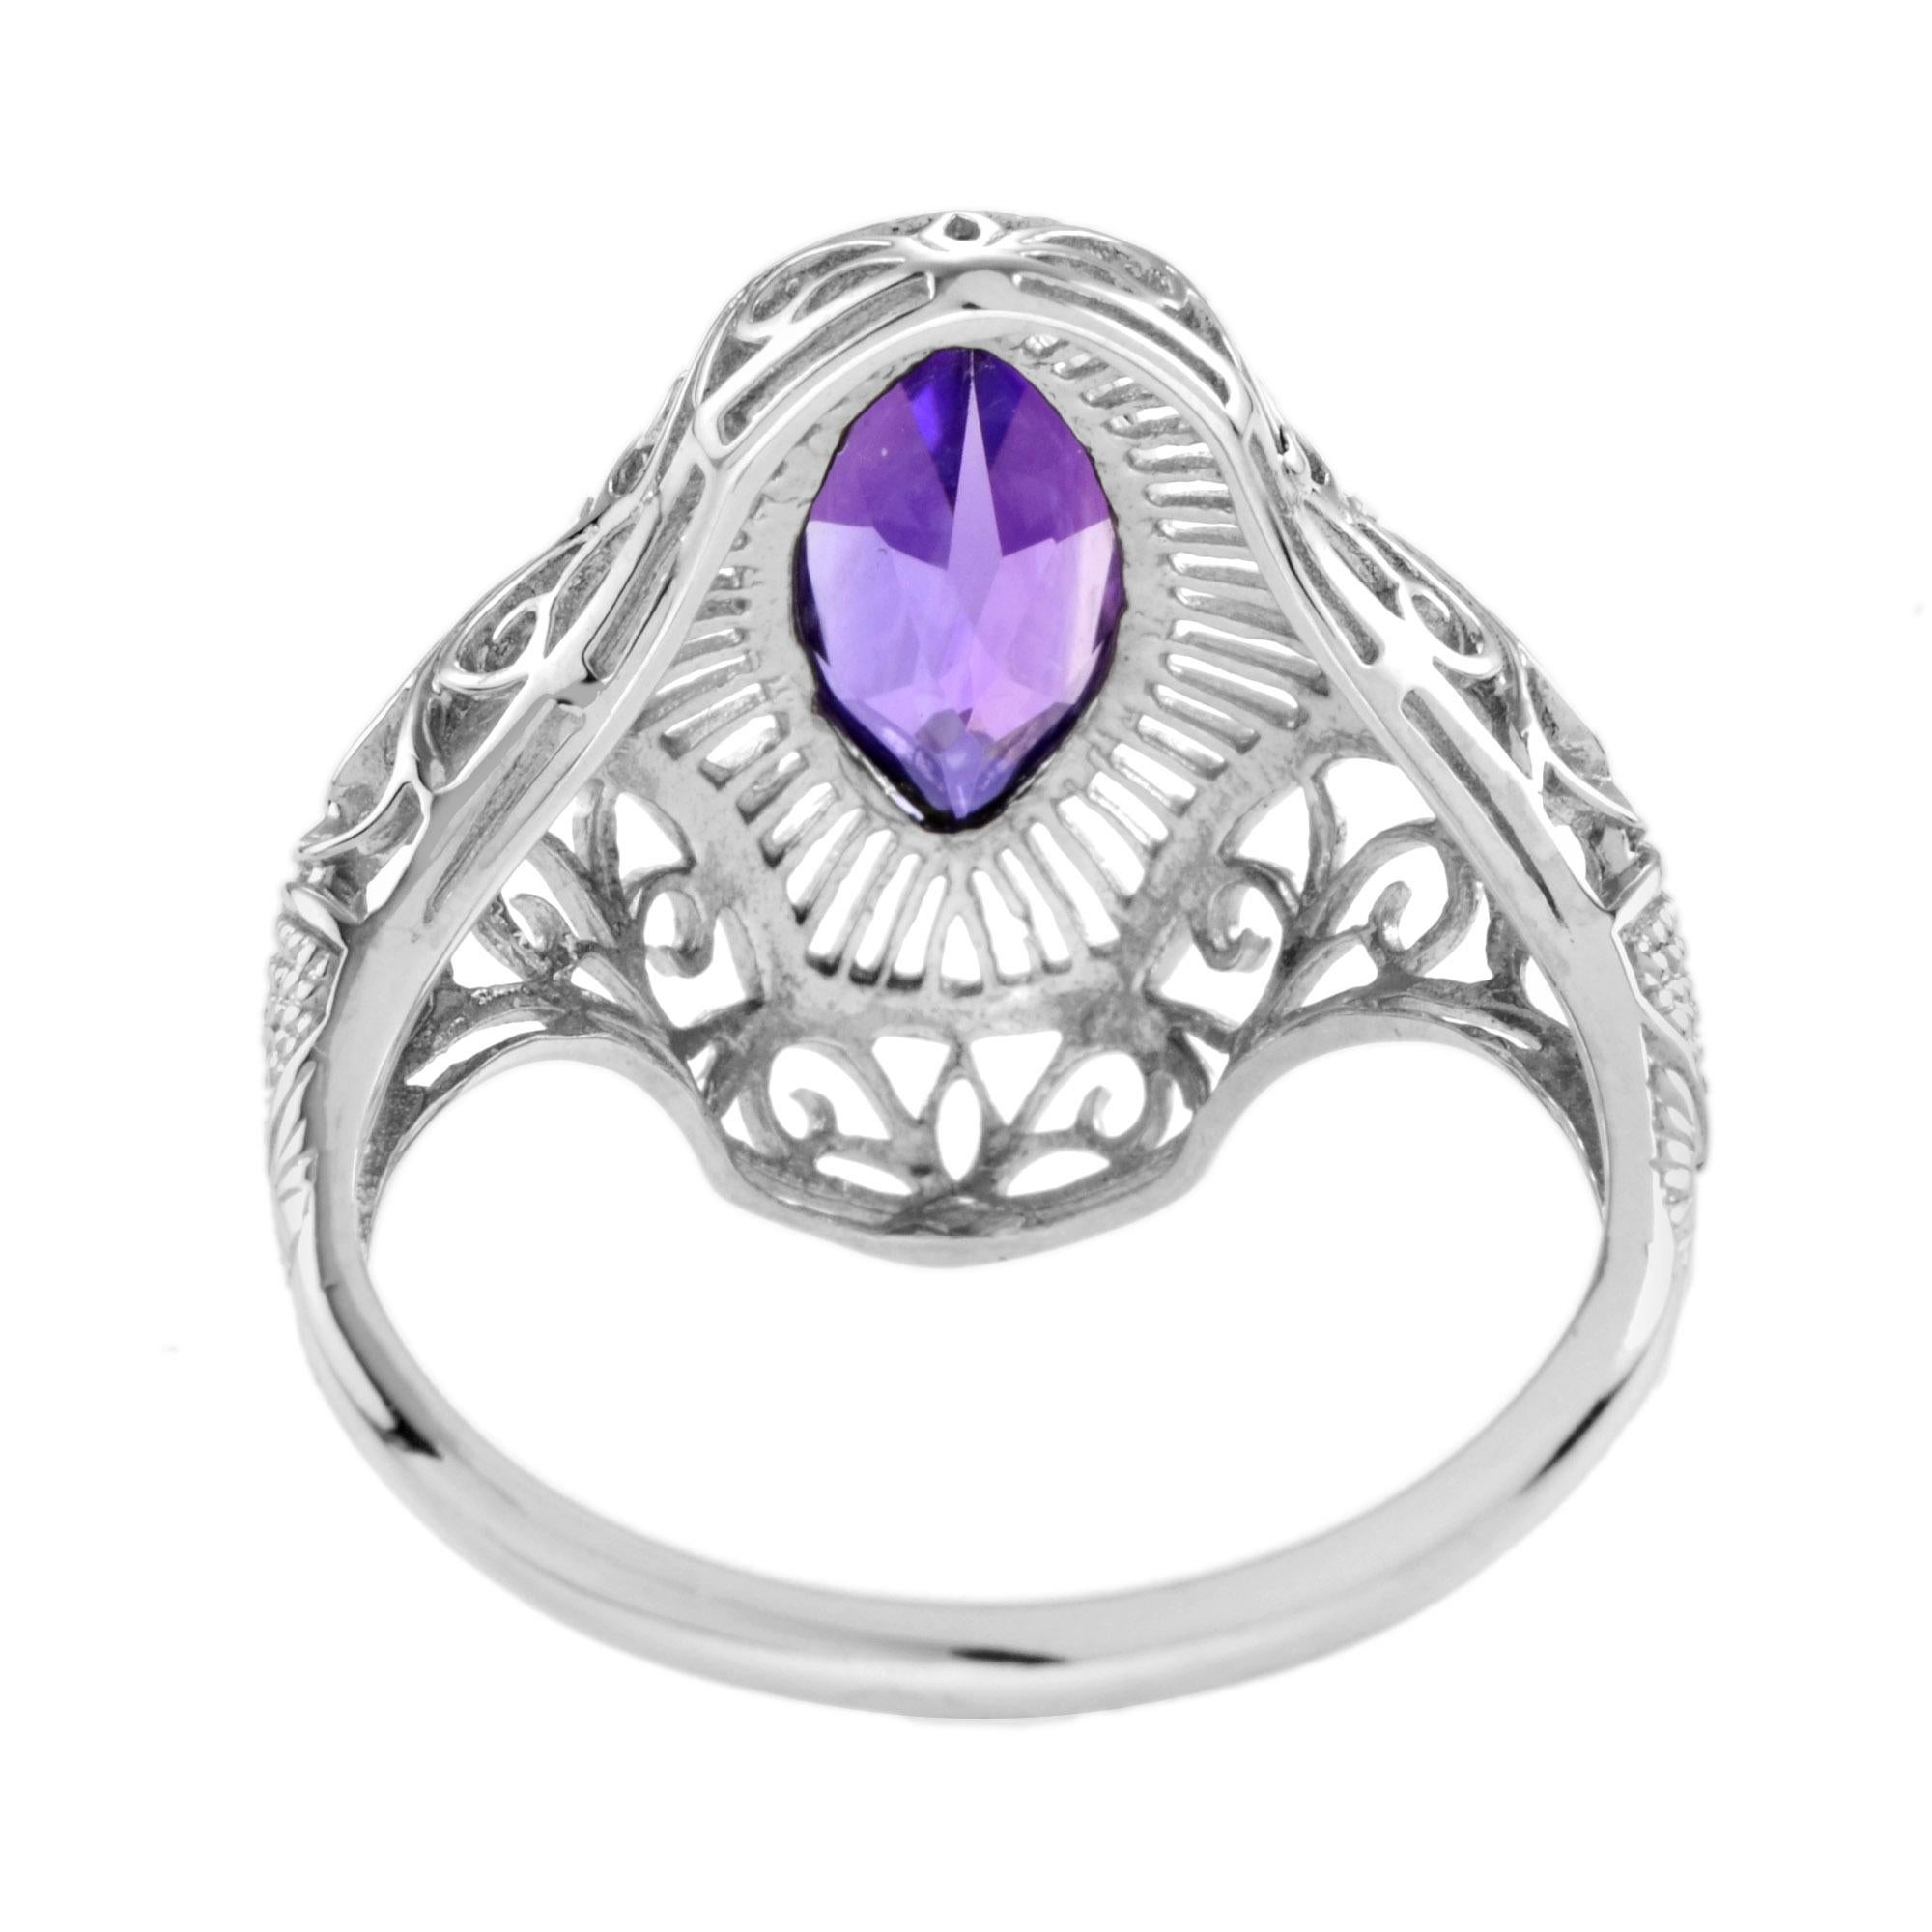 Art Deco Marquise Amethyst Vintage Style Filigree Ring in 14K White Gold